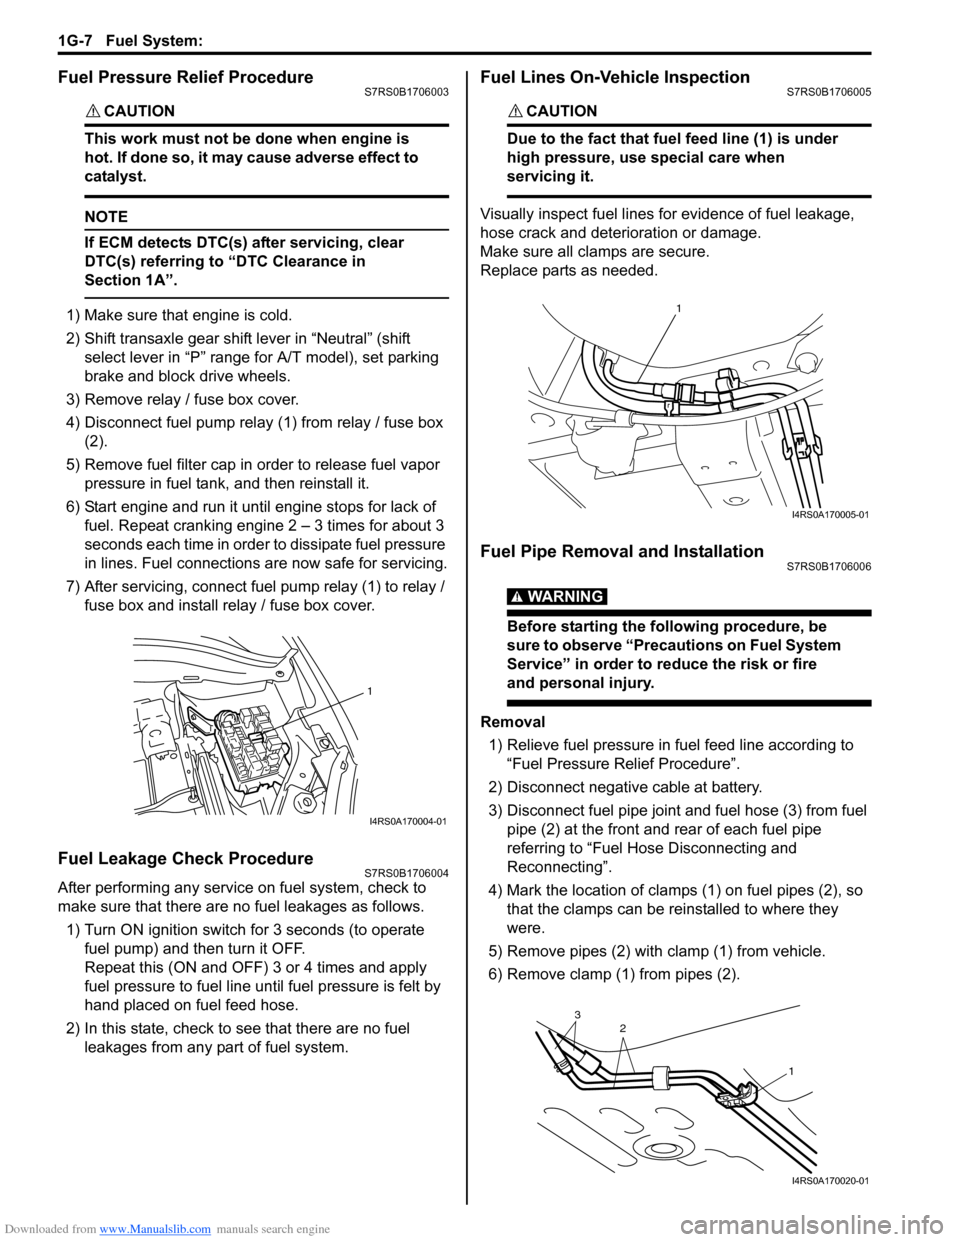 SUZUKI SWIFT 2004 2.G Service Workshop Manual Downloaded from www.Manualslib.com manuals search engine 1G-7 Fuel System: 
Fuel Pressure Relief ProcedureS7RS0B1706003
CAUTION! 
This work must not be done when engine is 
hot. If done so, it may cau